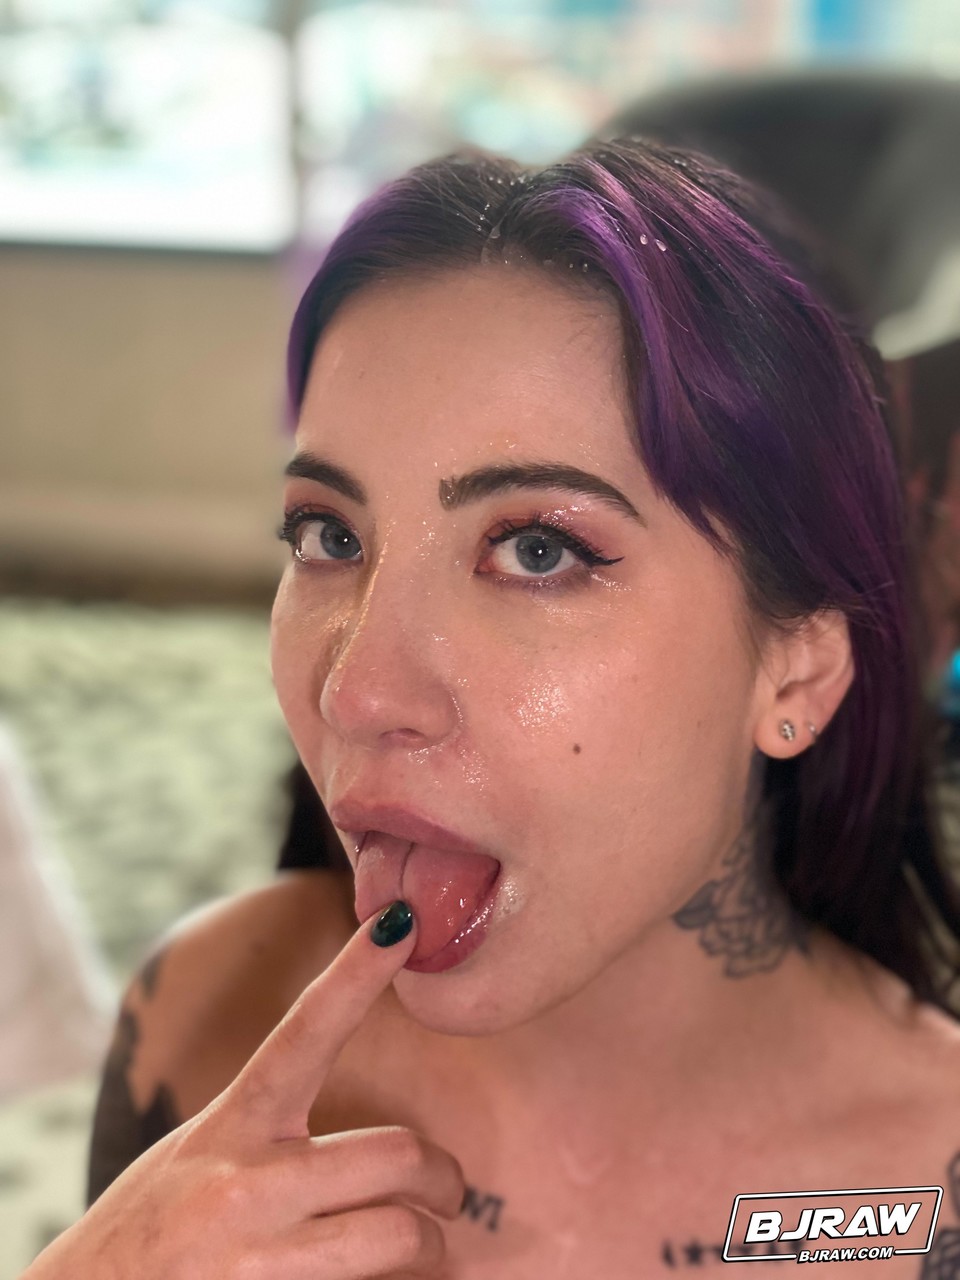 Brunette babe with tattoos Charlotte Sartre takes a dick in her mouth zdjęcie porno #424561435 | BJ Raw Pics, Charlotte Sartre, Tattoo, mobilne porno